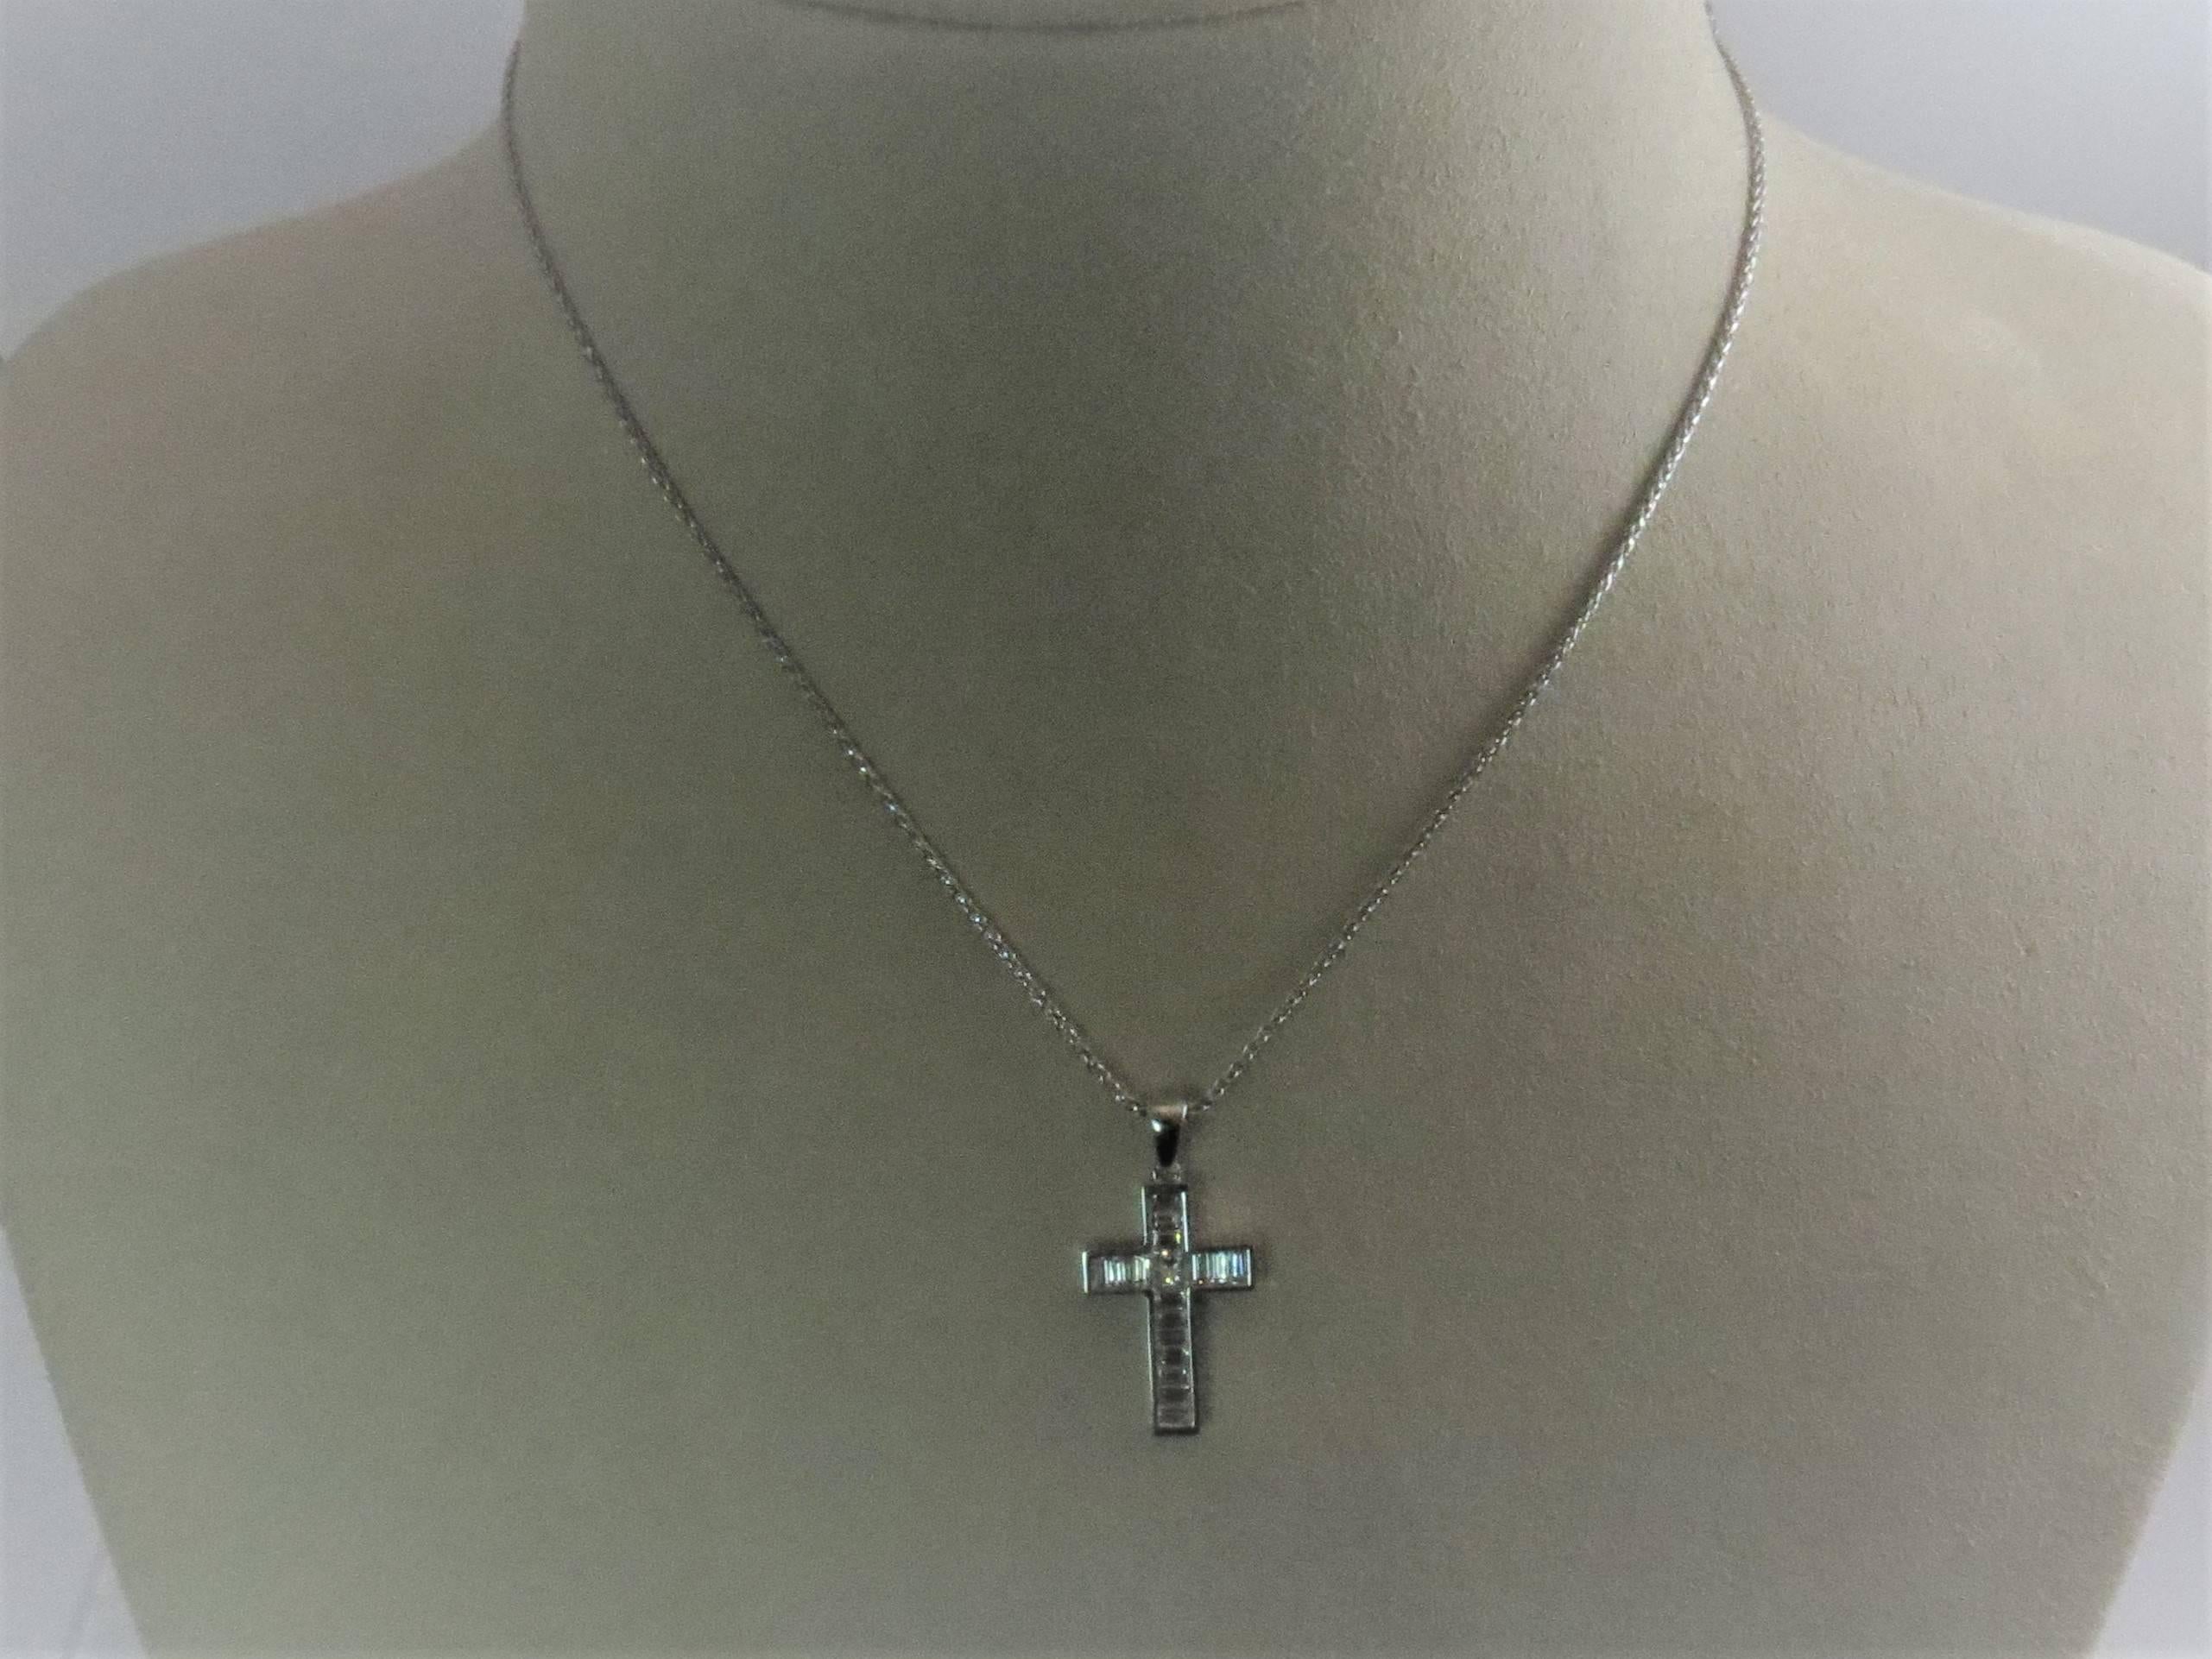 18K white gold cross, channel set with 16 baguette diamonds and one princess cut diamond, G-H color, VS color weighing 1.02cts total suspended from 16 inch 18K white gold chain.